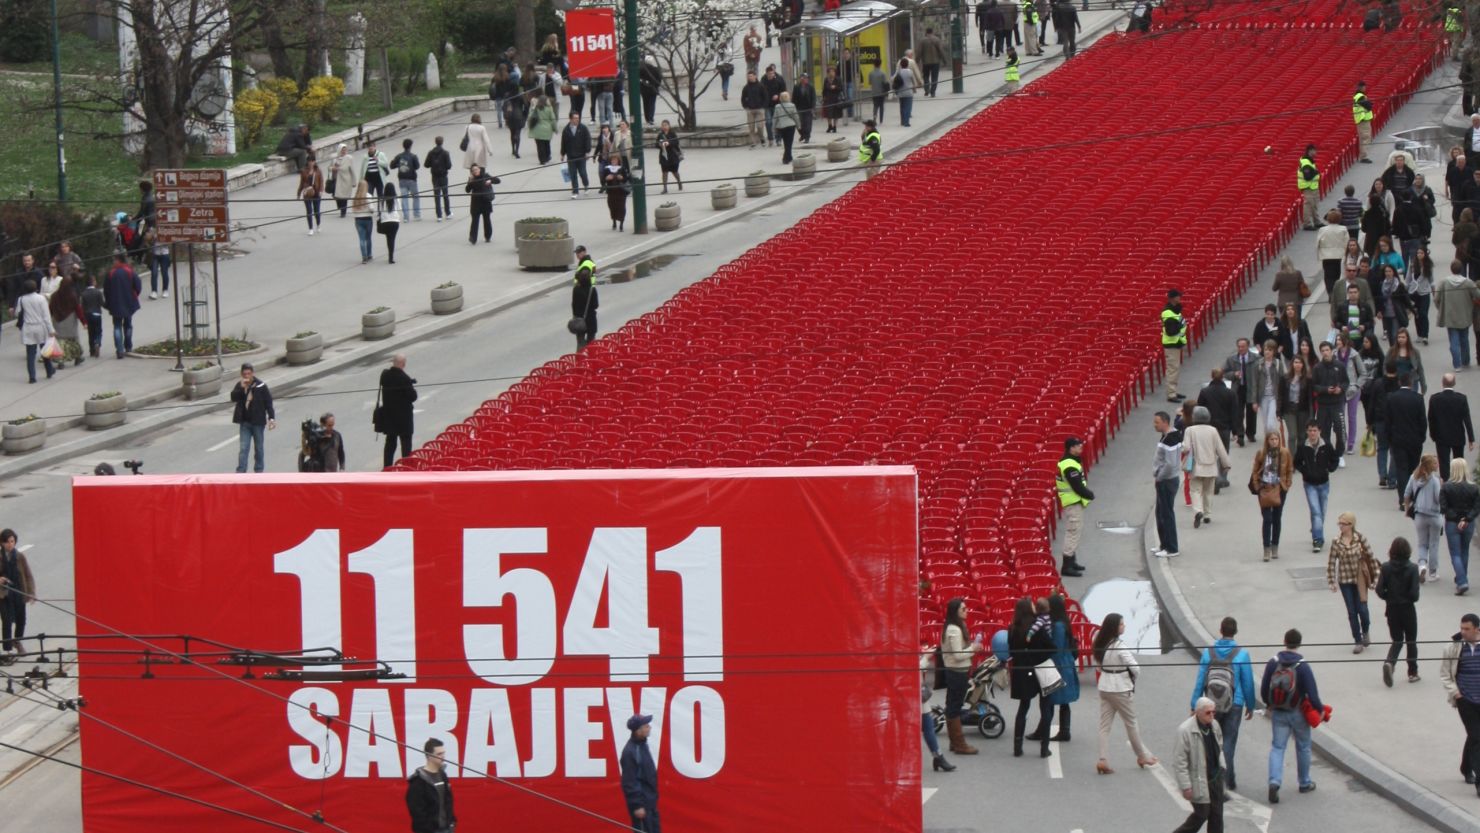 A swathe of red snakes through Sarajevo. Each of the 11,541 chairs symbolizes a person killed during the Siege of Sarajevo.